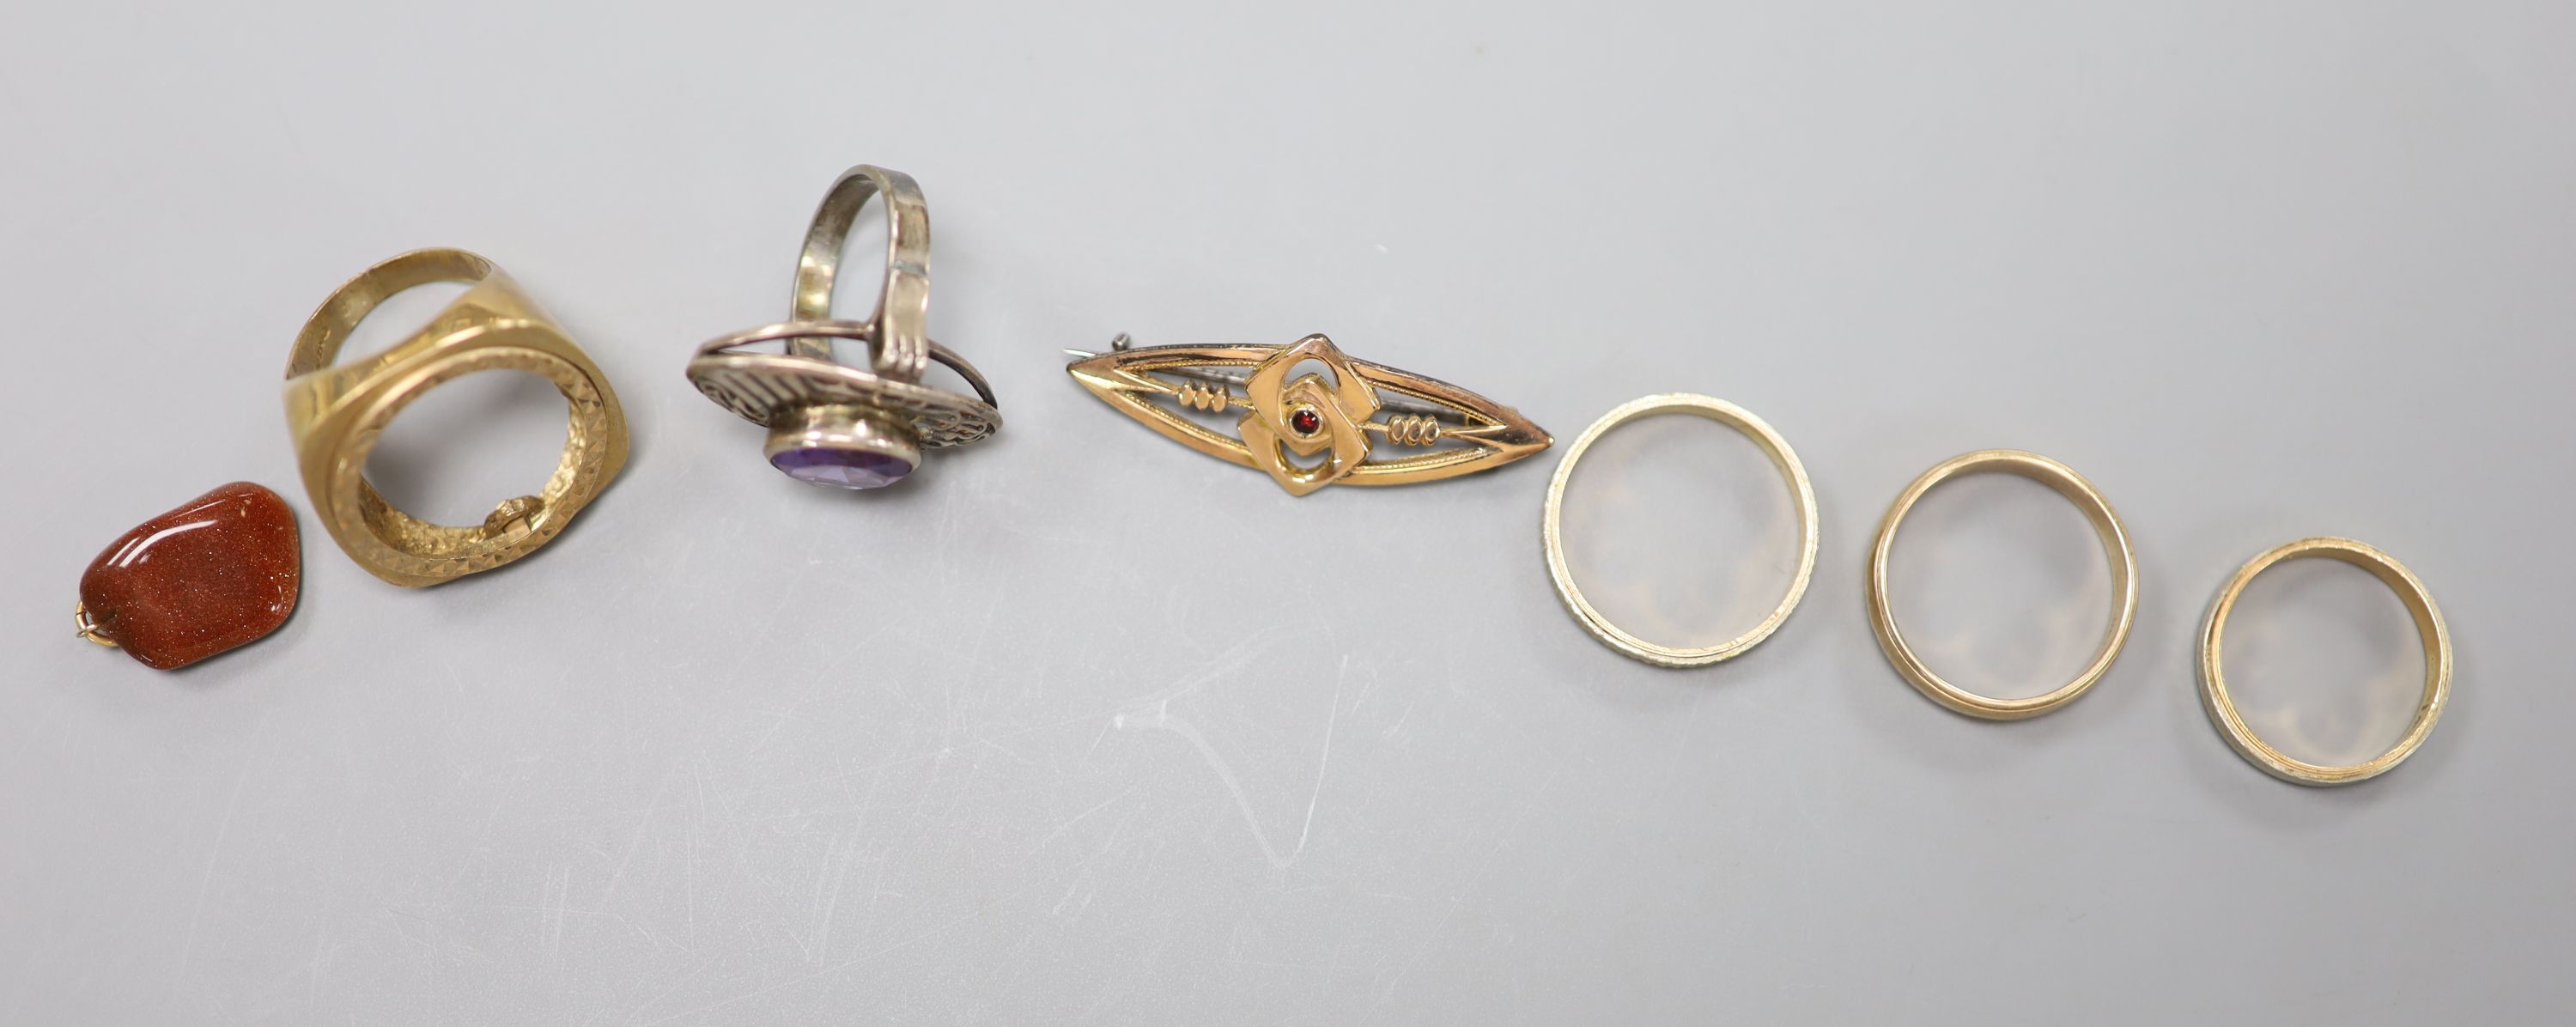 A 9ct gold shank, a 9ct band, three other rings, a brooch and a pendant